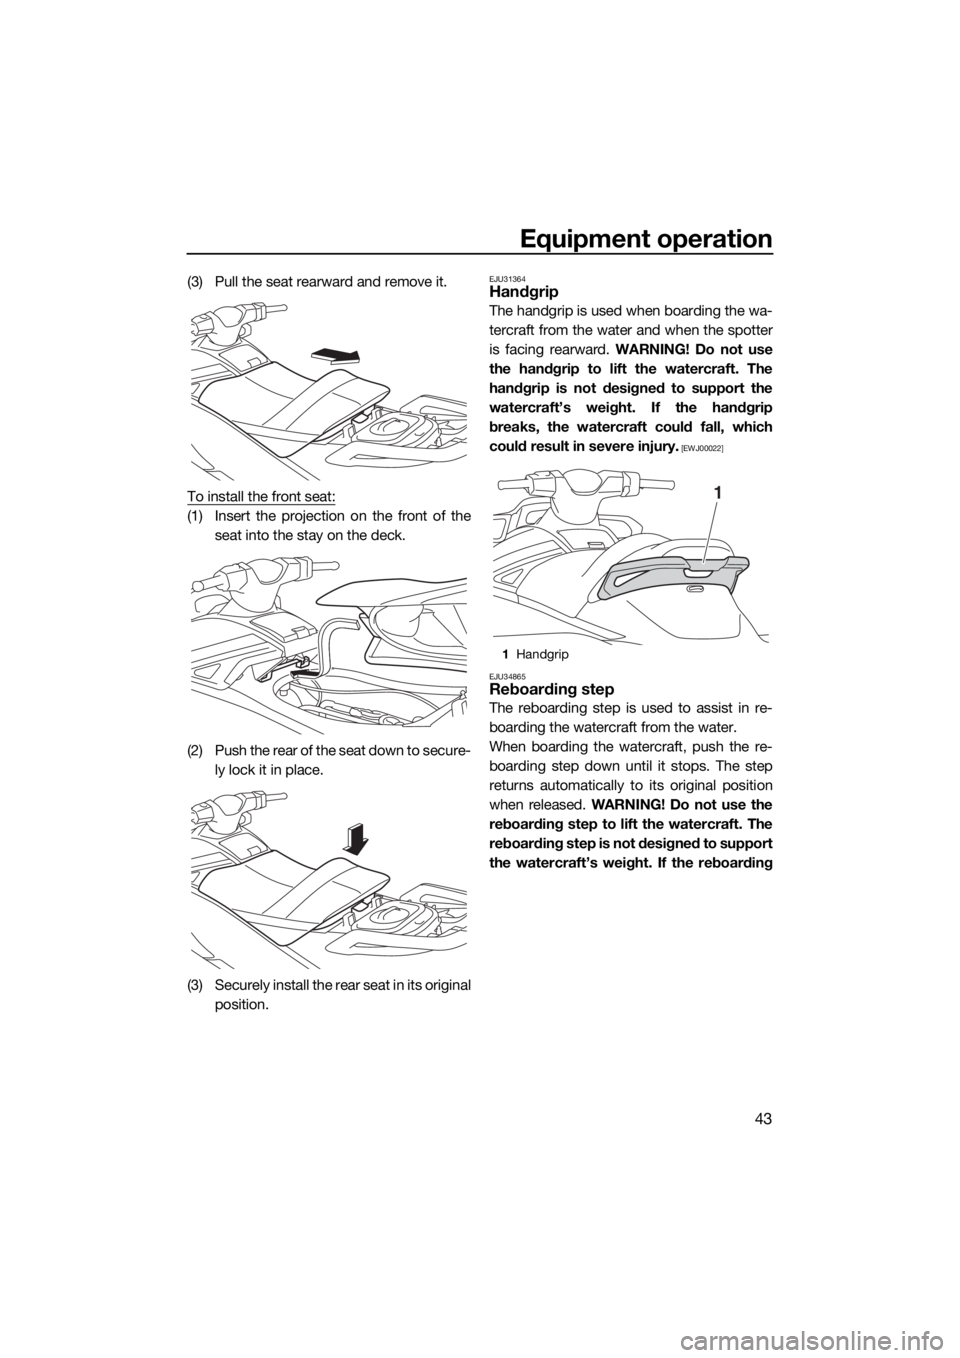 YAMAHA GP1800 2017 Service Manual Equipment operation
43
(3) Pull the seat rearward and remove it.
To install the front seat:
(1) Insert the projection on the front of the
seat into the stay on the deck.
(2) Push the rear of the seat 